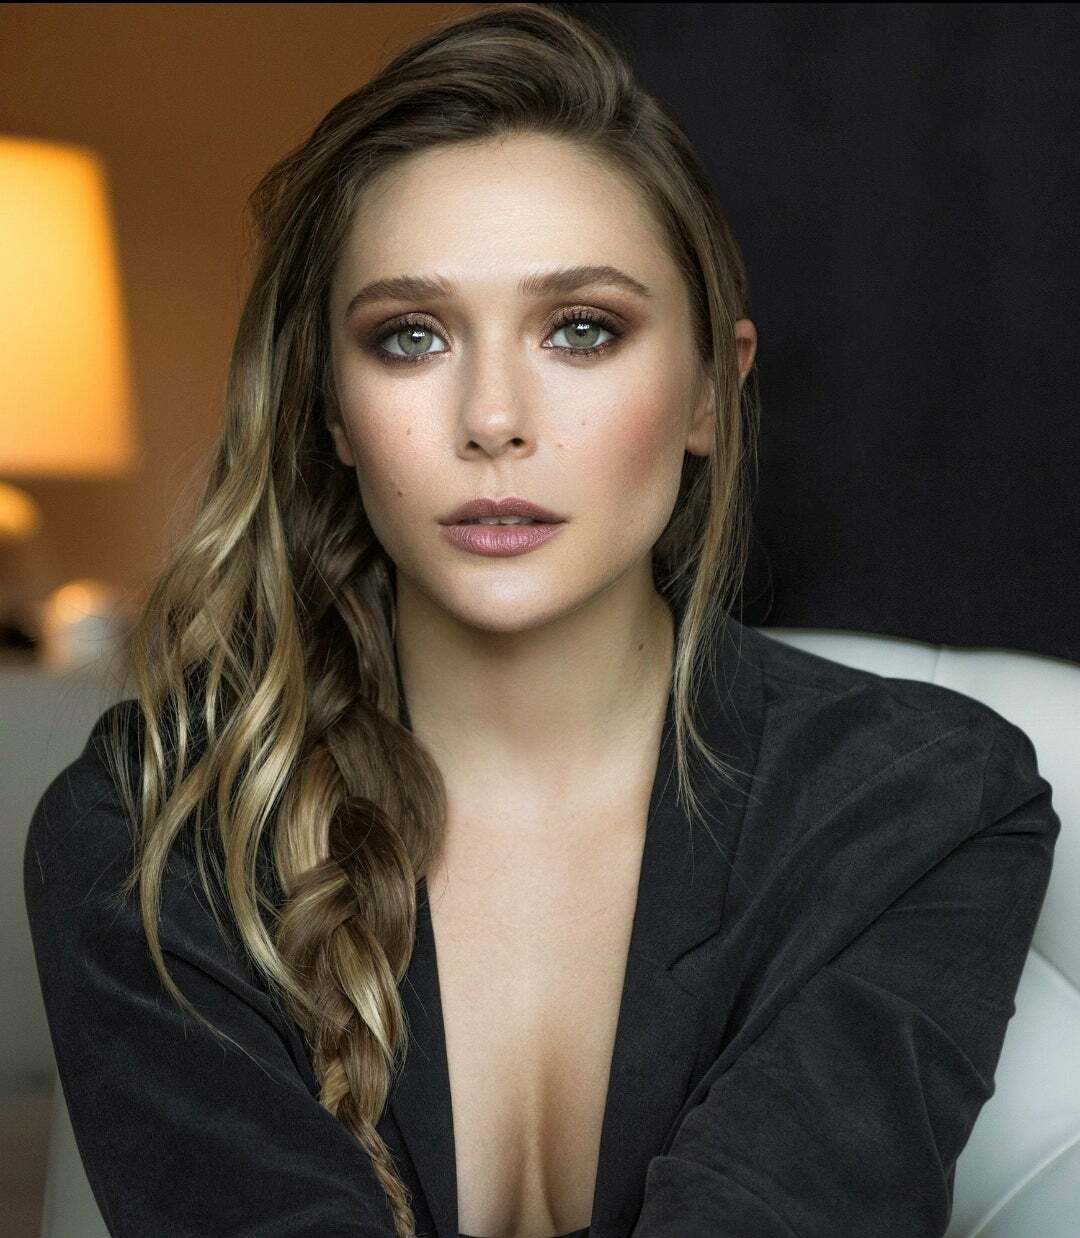 Wouldn't it just be greay to be fucked by Elizabeth Olsen? I'd do everything for it